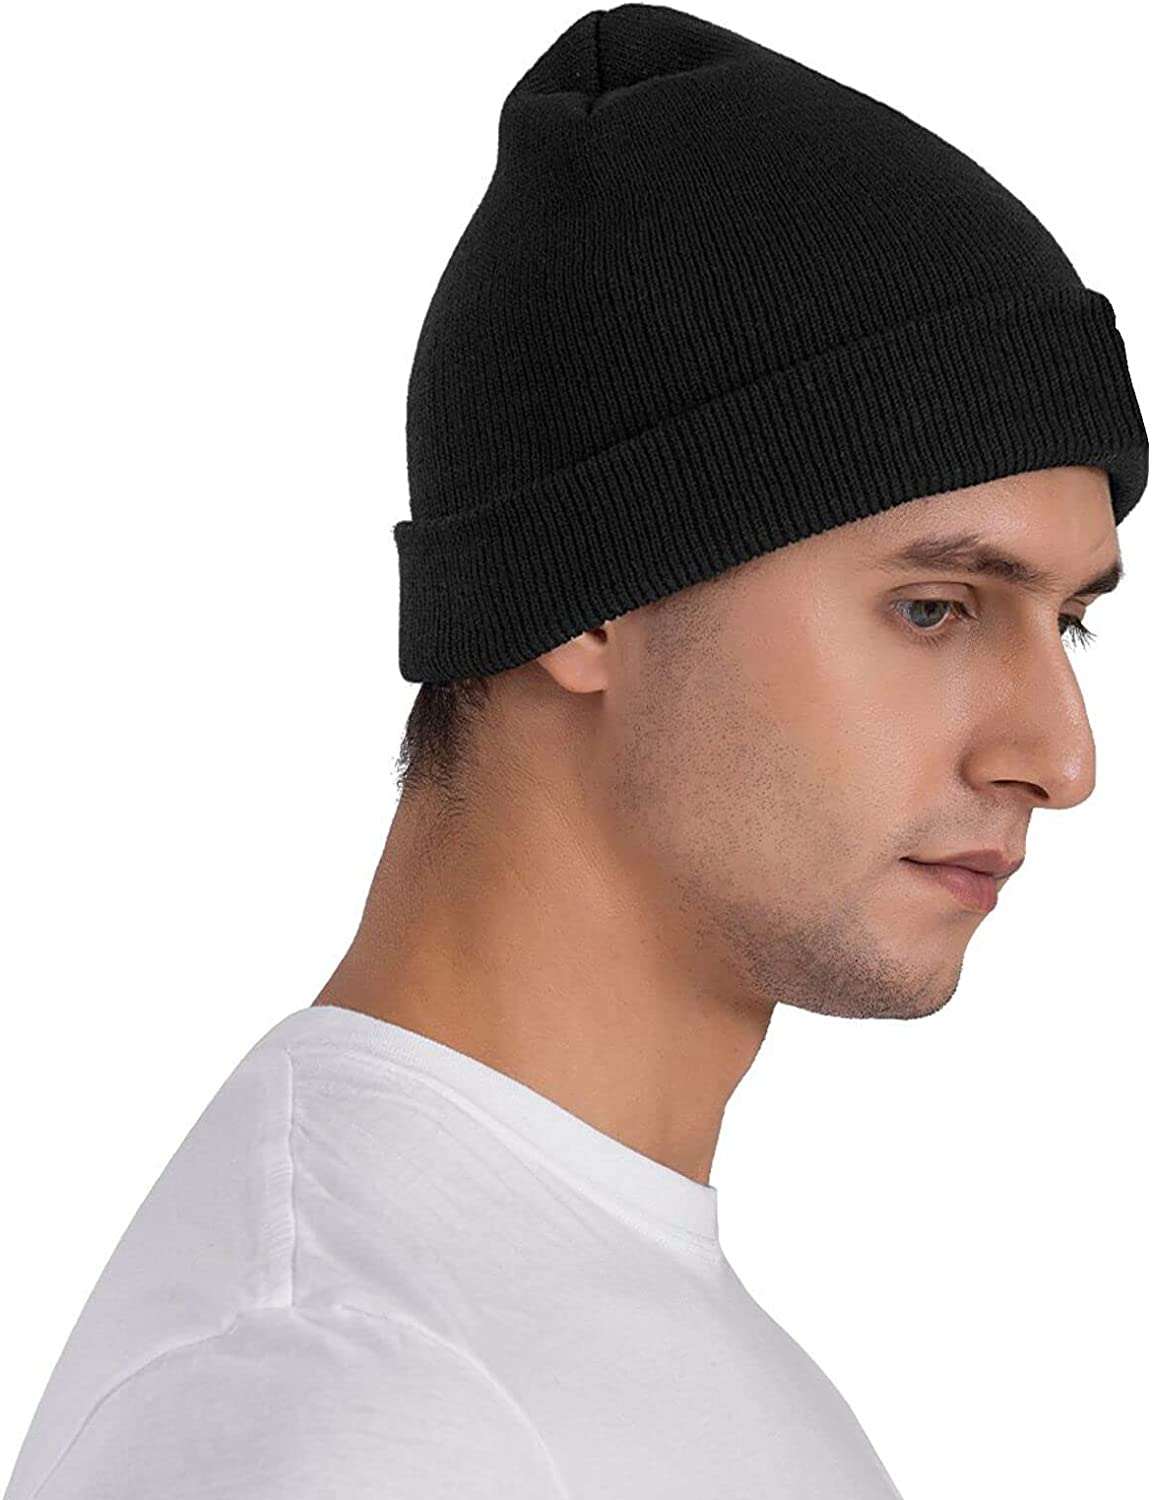 Embroidered Logo Knit Beanie Men for Stretchy Warm Suicide Cold Toboggan for Weather Women gogoherhome Hats Black Soft Boys Cap